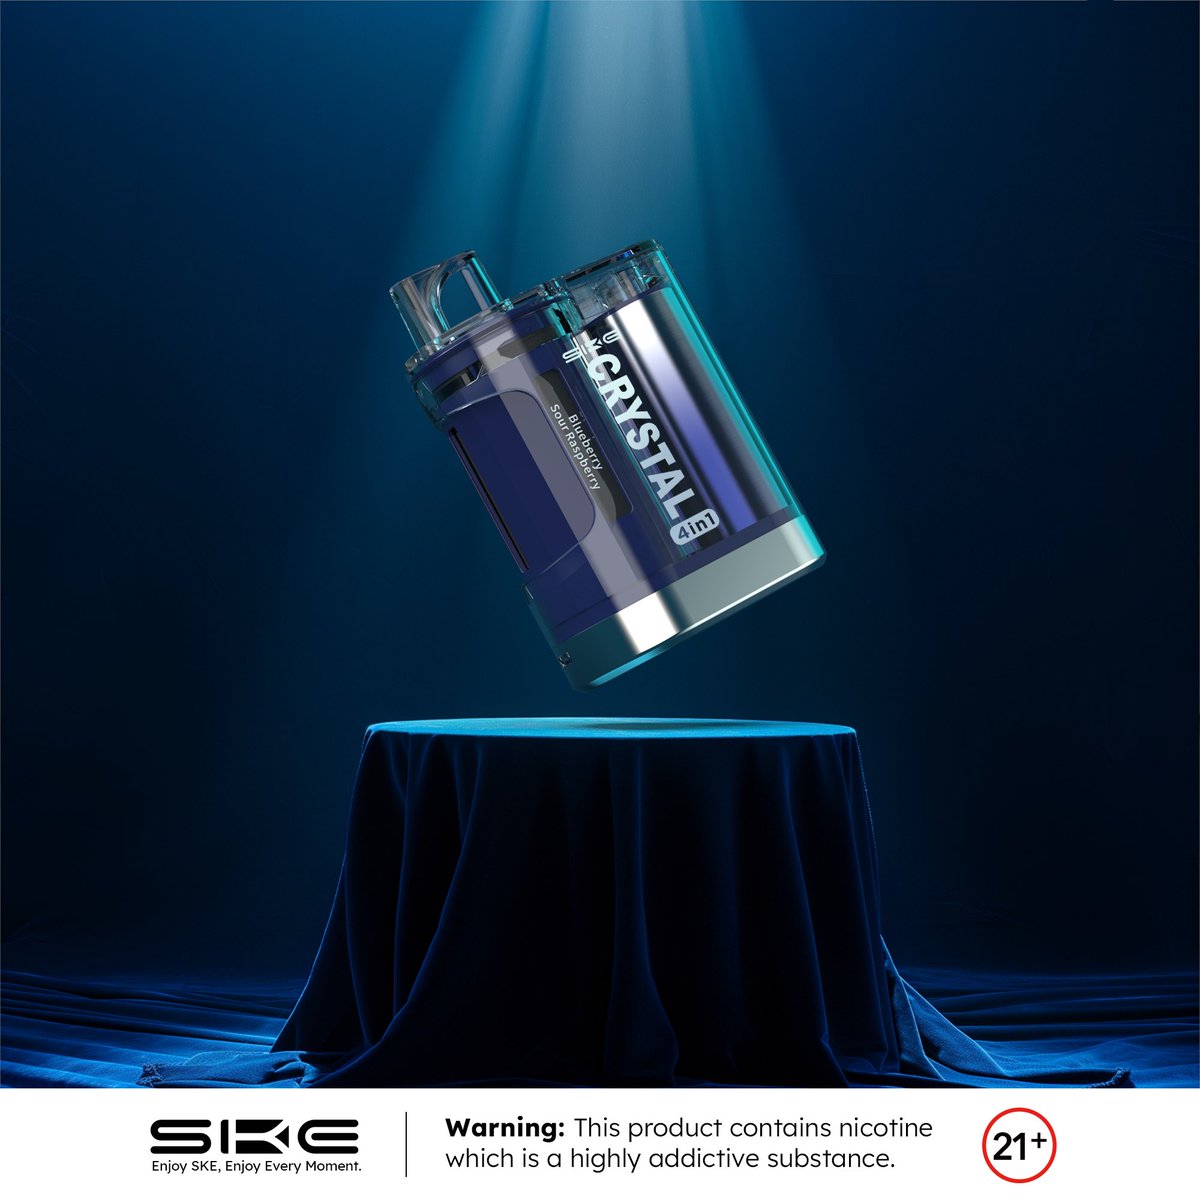 💫💖The whole world is coming for you, and you're about to slay with our dazzling designs and brilliant craftsmanship. 

 Warning: This product contains nicotine which is a highly addictive substance. You must be 21+
#skecrystal4in1 #skecrystal #vapers #VapeLove #VapeDaily